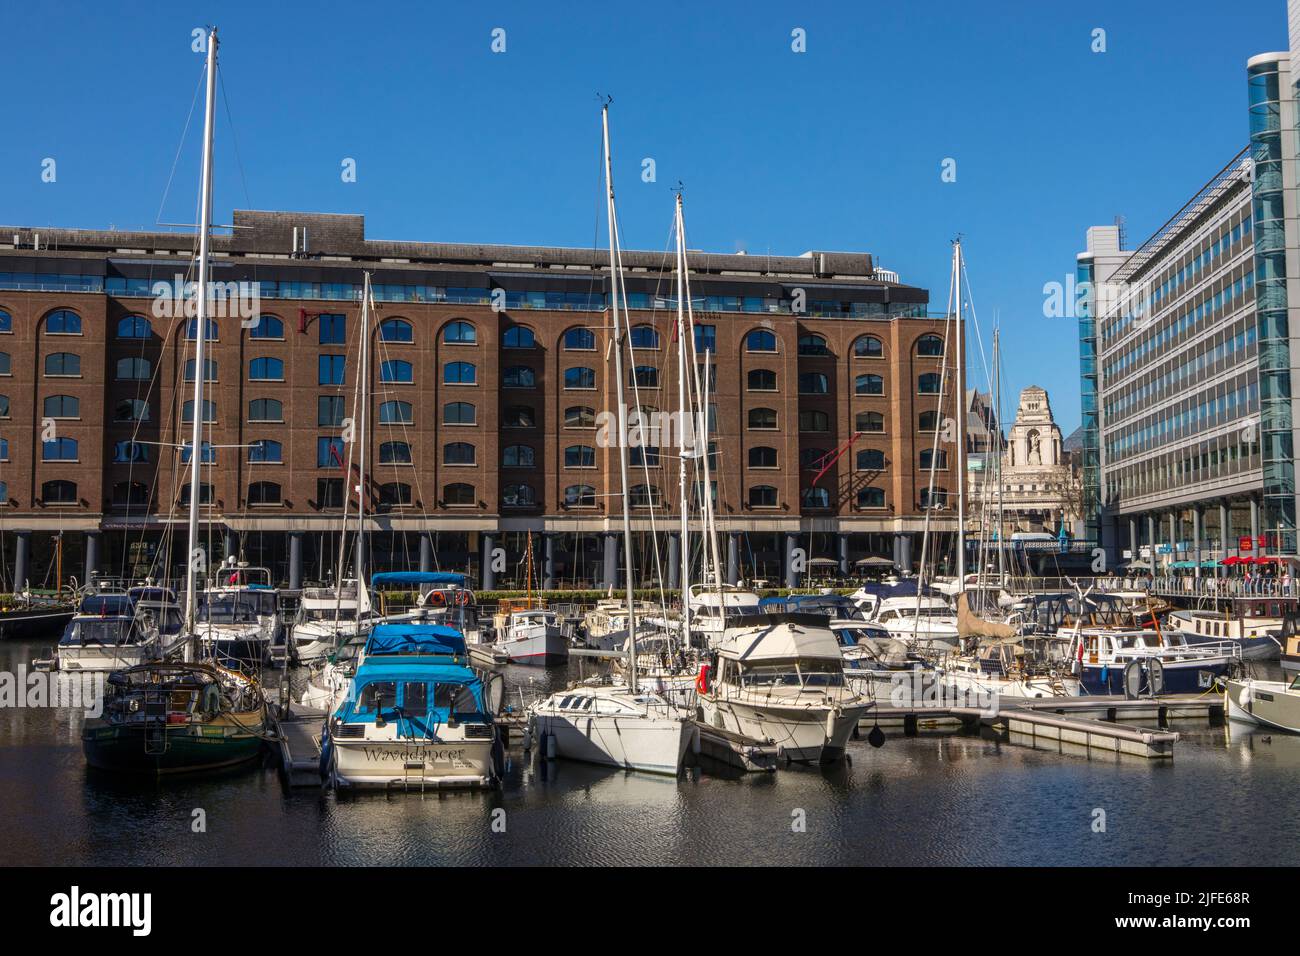 London, UK - March 18th 2022: View of the historic St. Katherines Dock in London, UK.  The 10 Trinity Square building, also known as the former Port o Stock Photo